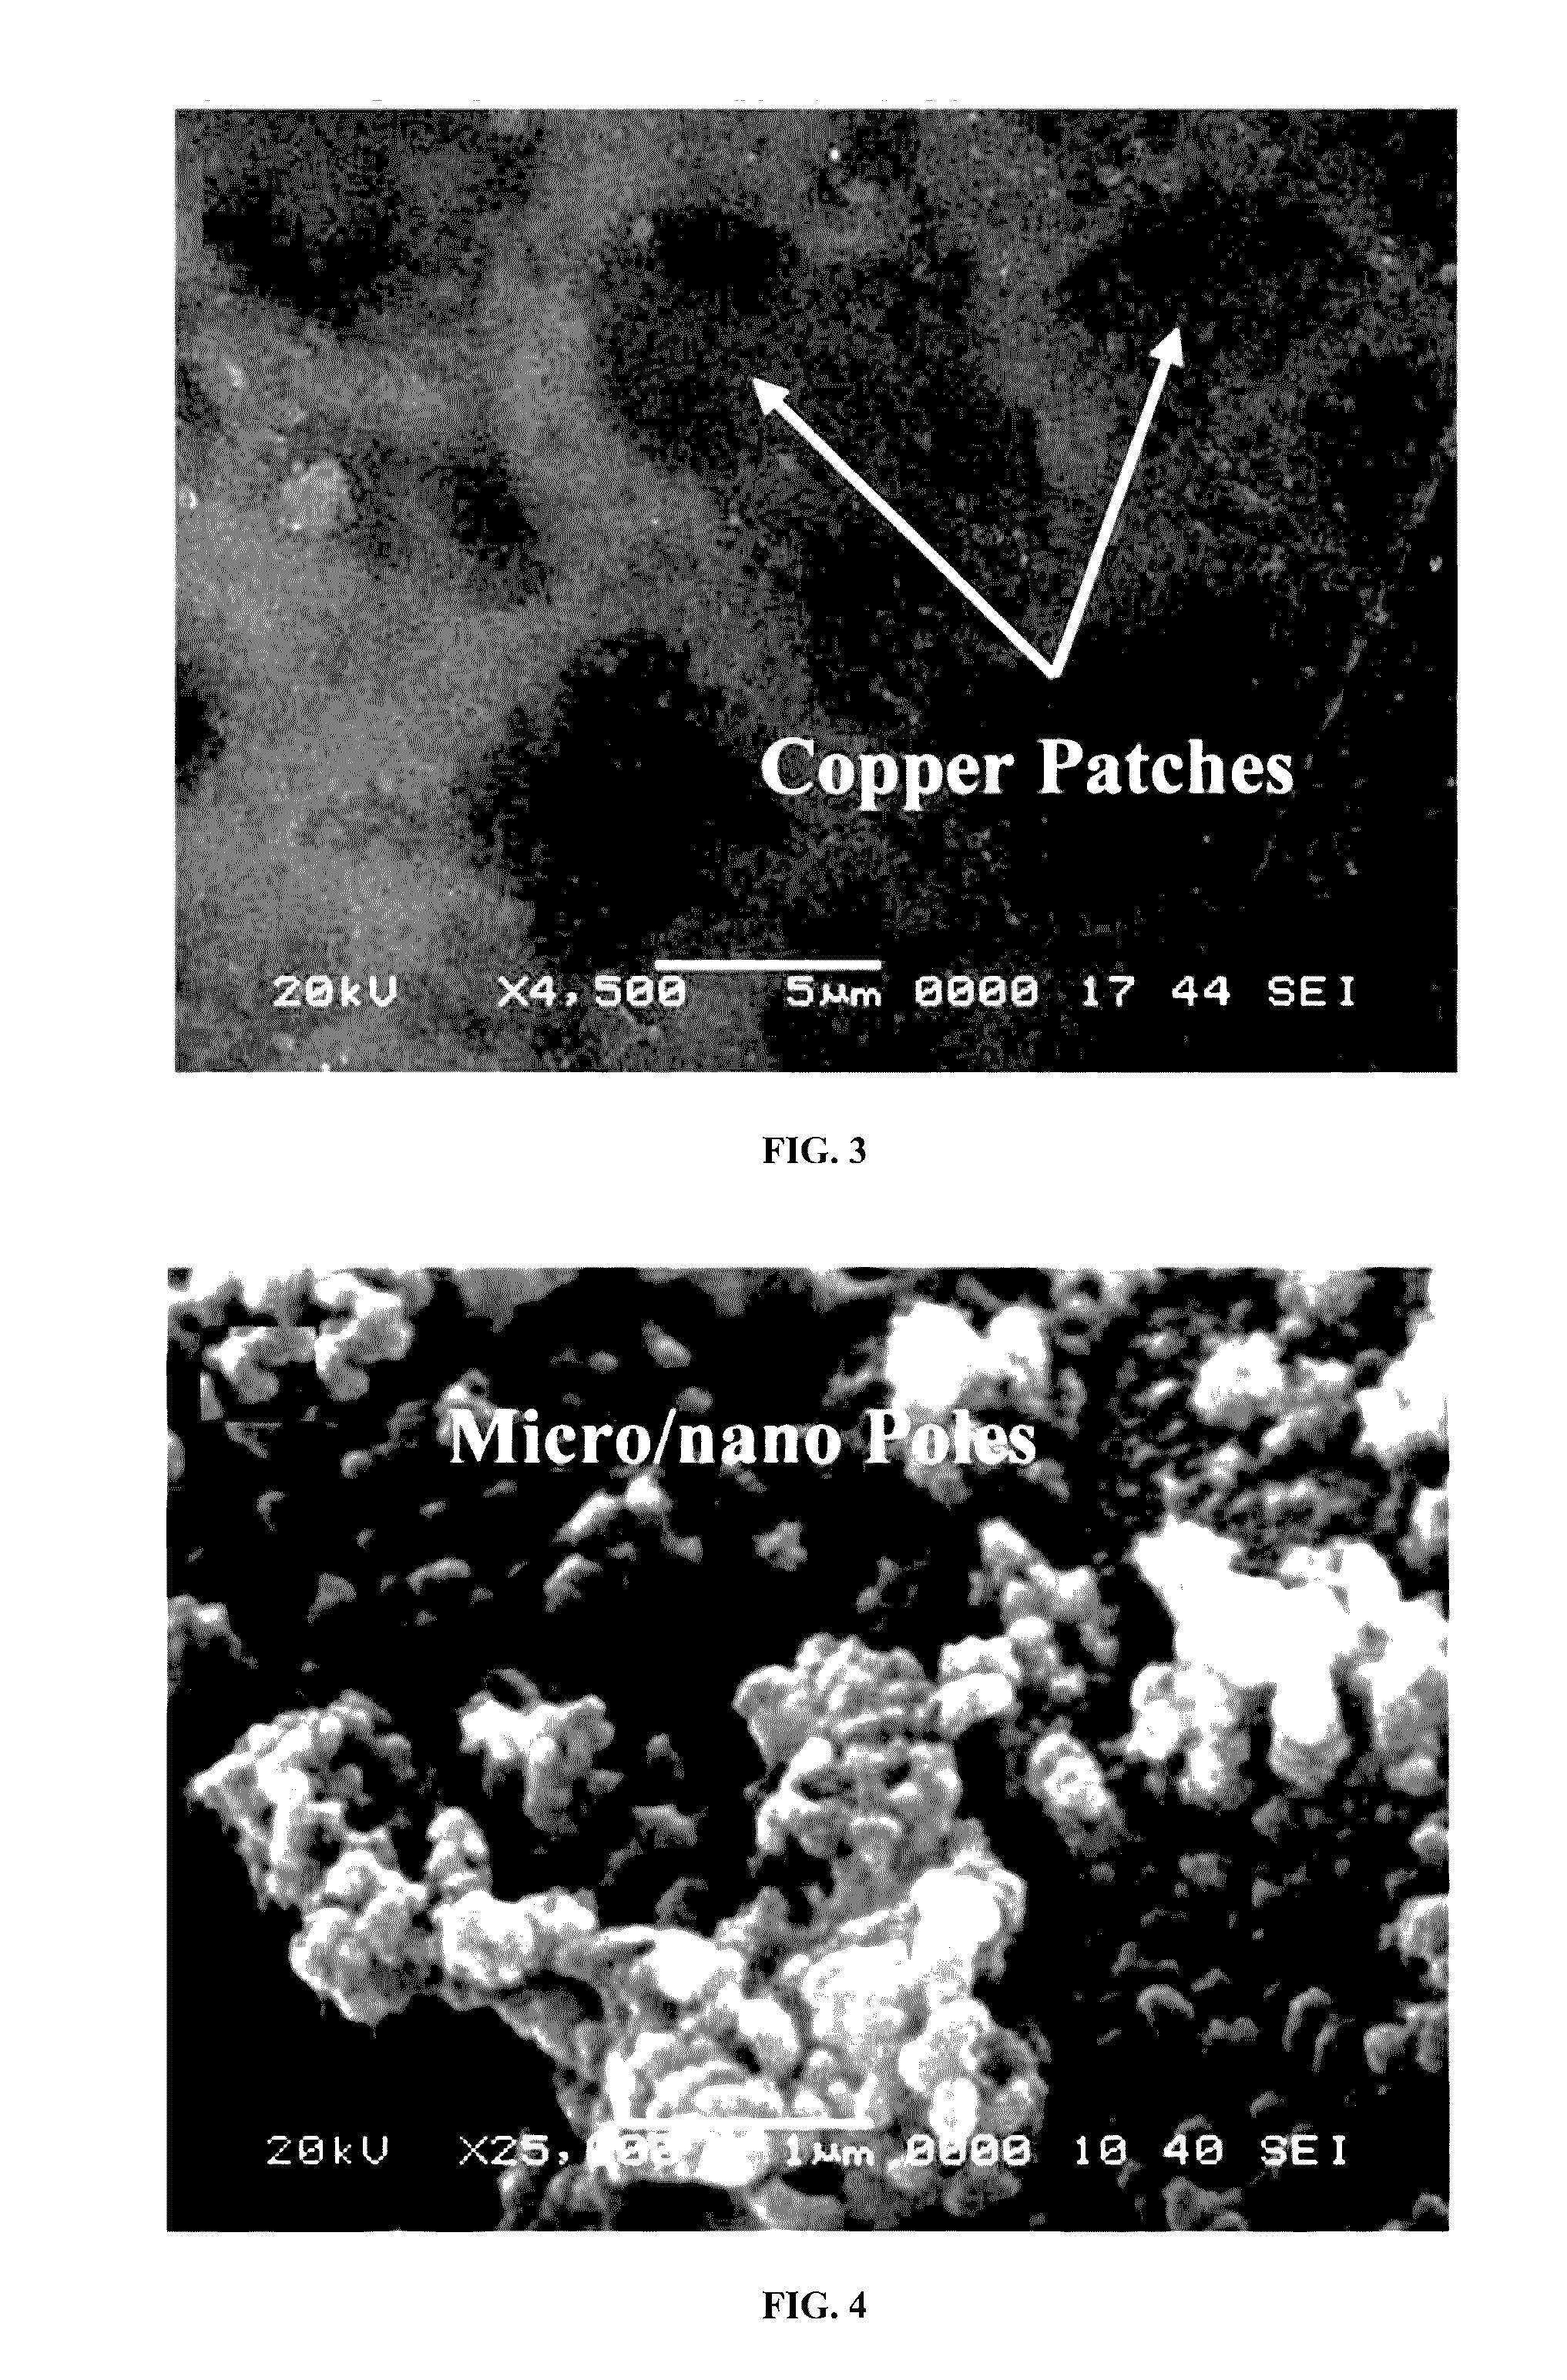 Laser ablation method for treating a copper alloy containing metallic surface and increasing hydrophobicity